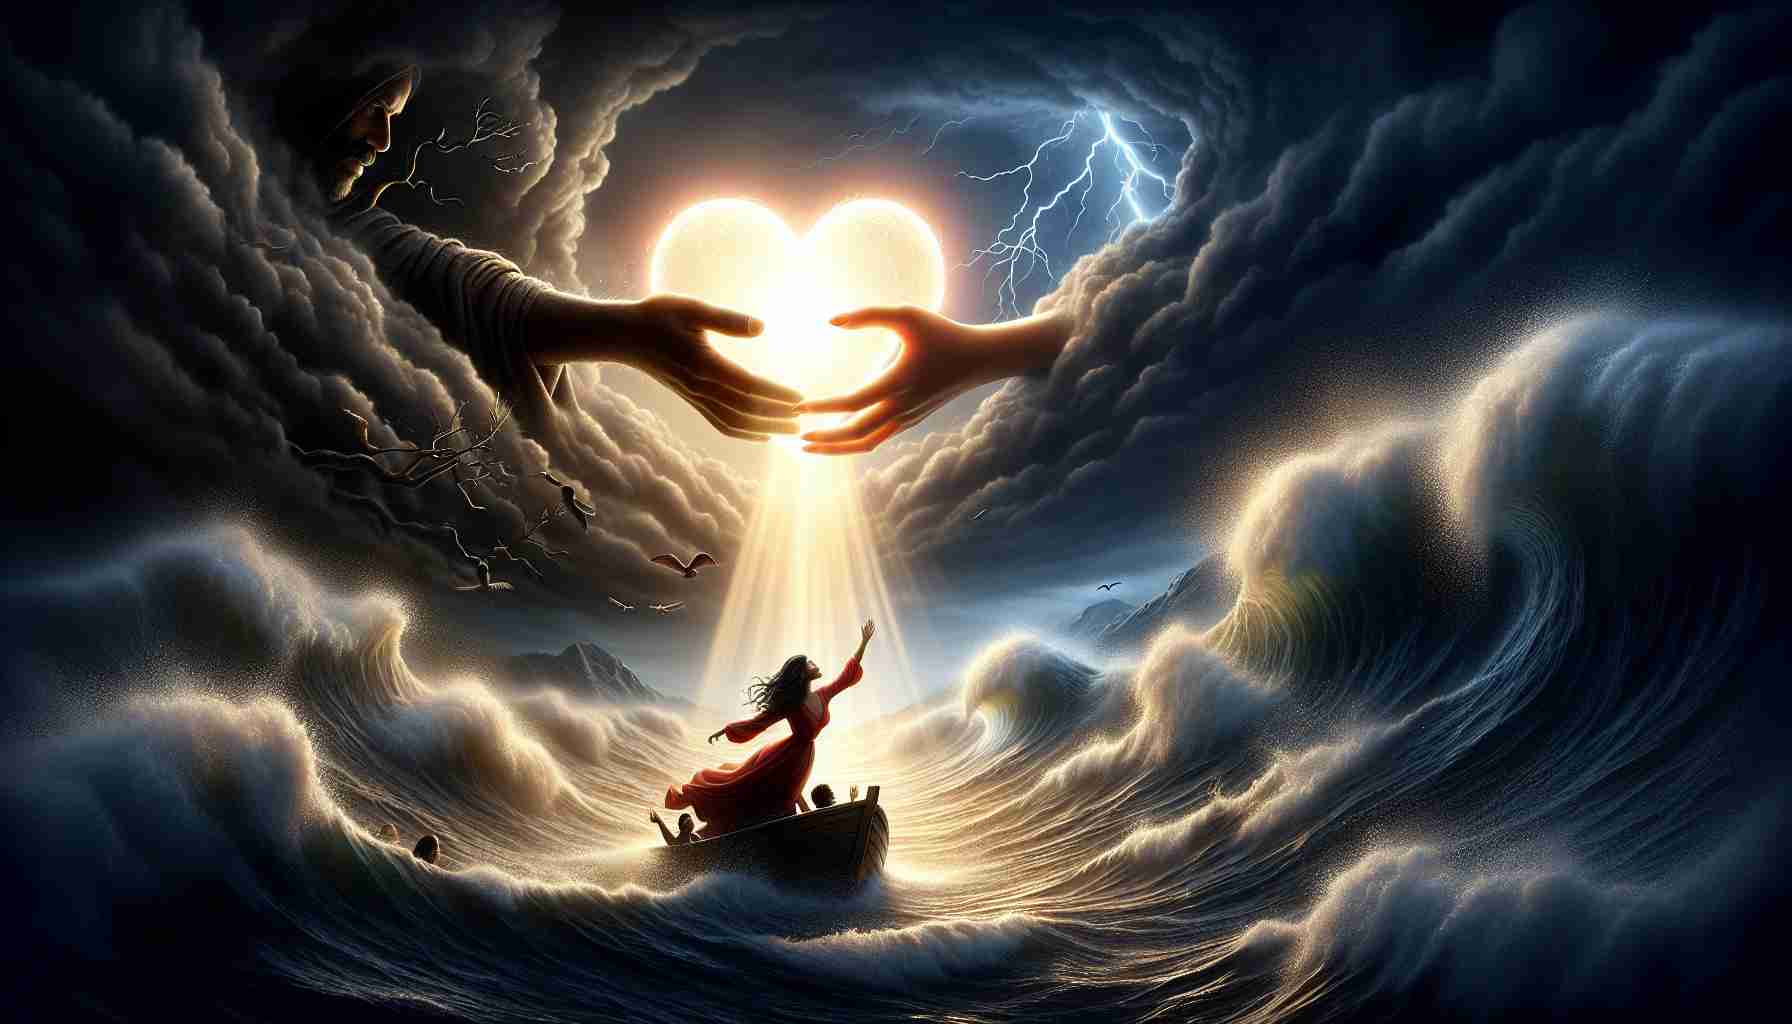 A highly detailed, realistic, high-definition image that symbolically represents 'Love Conquers All'. It portrays a bright, glowing heart delicately held by two hands, one being of a black descent woman and the other of a middle-eastern descent man, both reaching across a turbulent seascape, suggesting overcoming adversity. The heart illuminates shadowy foreground, casting warm light on the faces of lovers, symbolizing hope, unity, and the strength of love. In the background, the dark storm clouds are beginning to clear, revealing a fresh blue sky, suggesting the dawning of a new day after hardship.